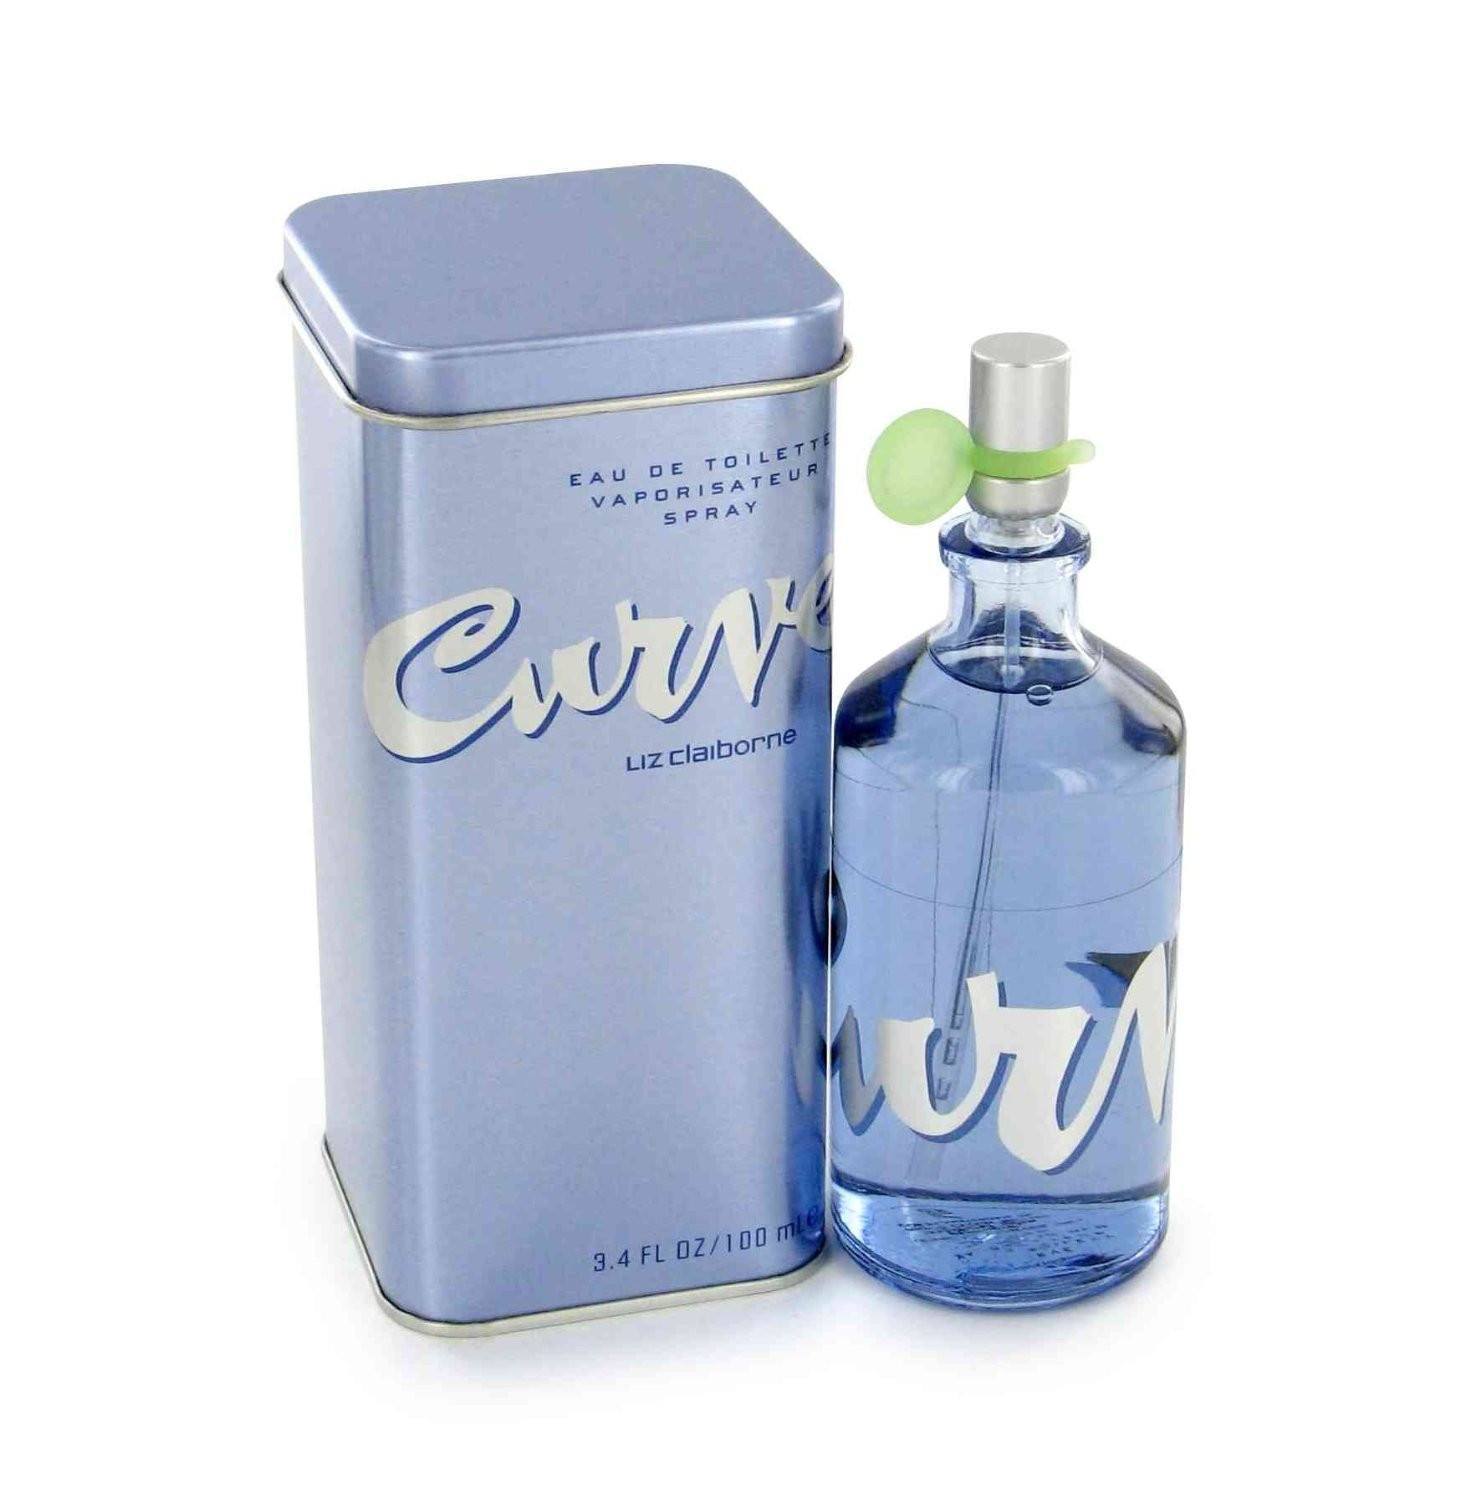 <p>Launched by the design house of Liz Claiborne in 1996,CURVE is classified as a refreshing,flowery fragrance. This feminine scent possesses a blend of citrus,water lily,and sandalwood. It is recommended for daytime wear.</p>
<p><strong>Recommended Use</strong> Daytime</p>